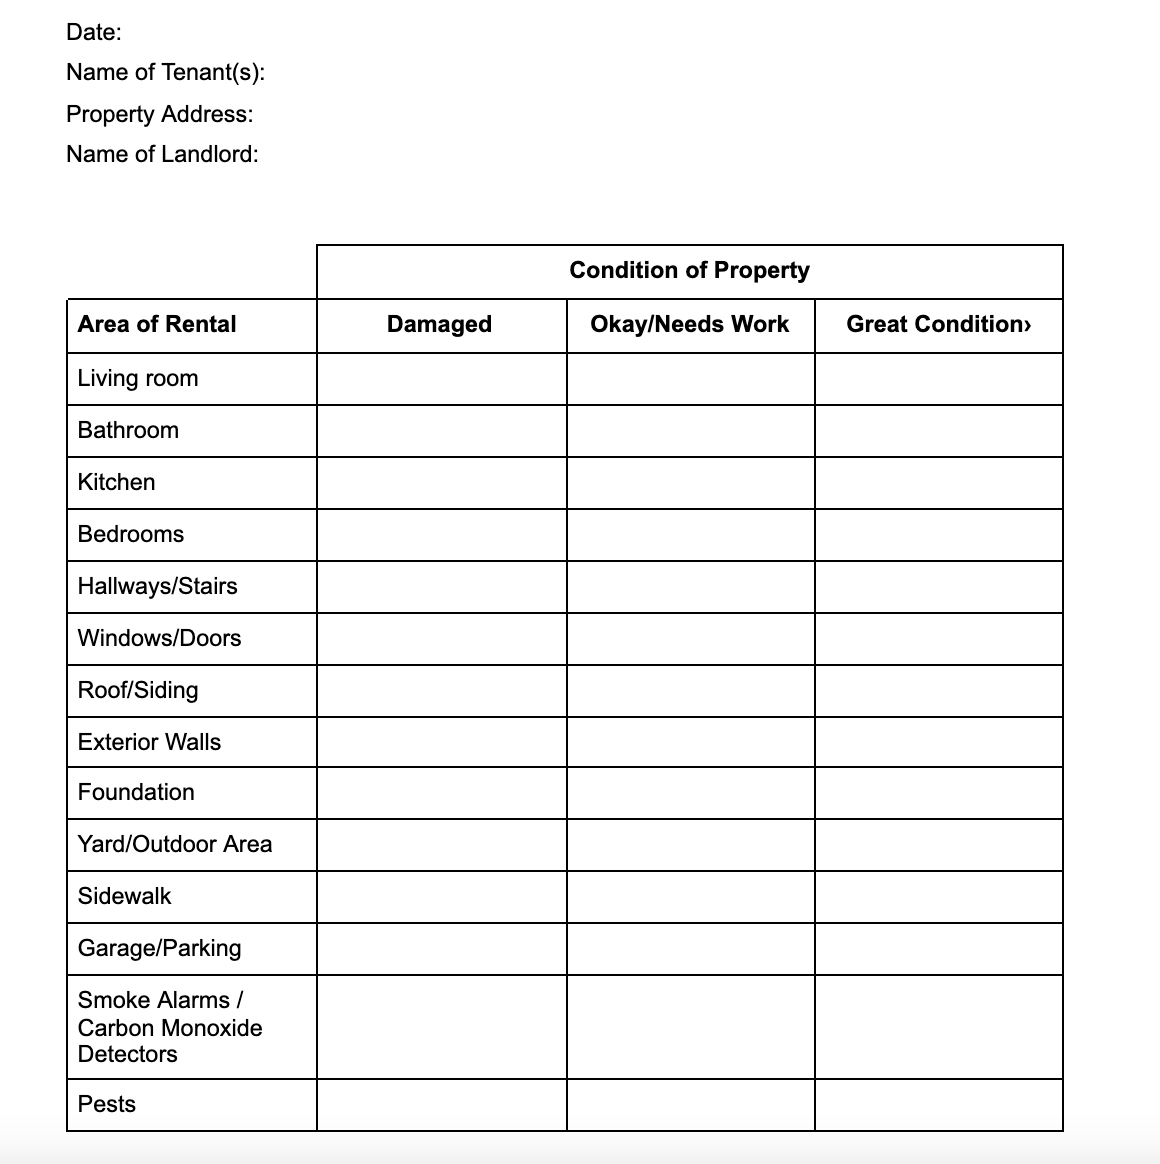 Image shows a Landlord Preventative Maintenaance Inspection Checklist, including areas of the rental to inspect and a place to mark the condition of the property